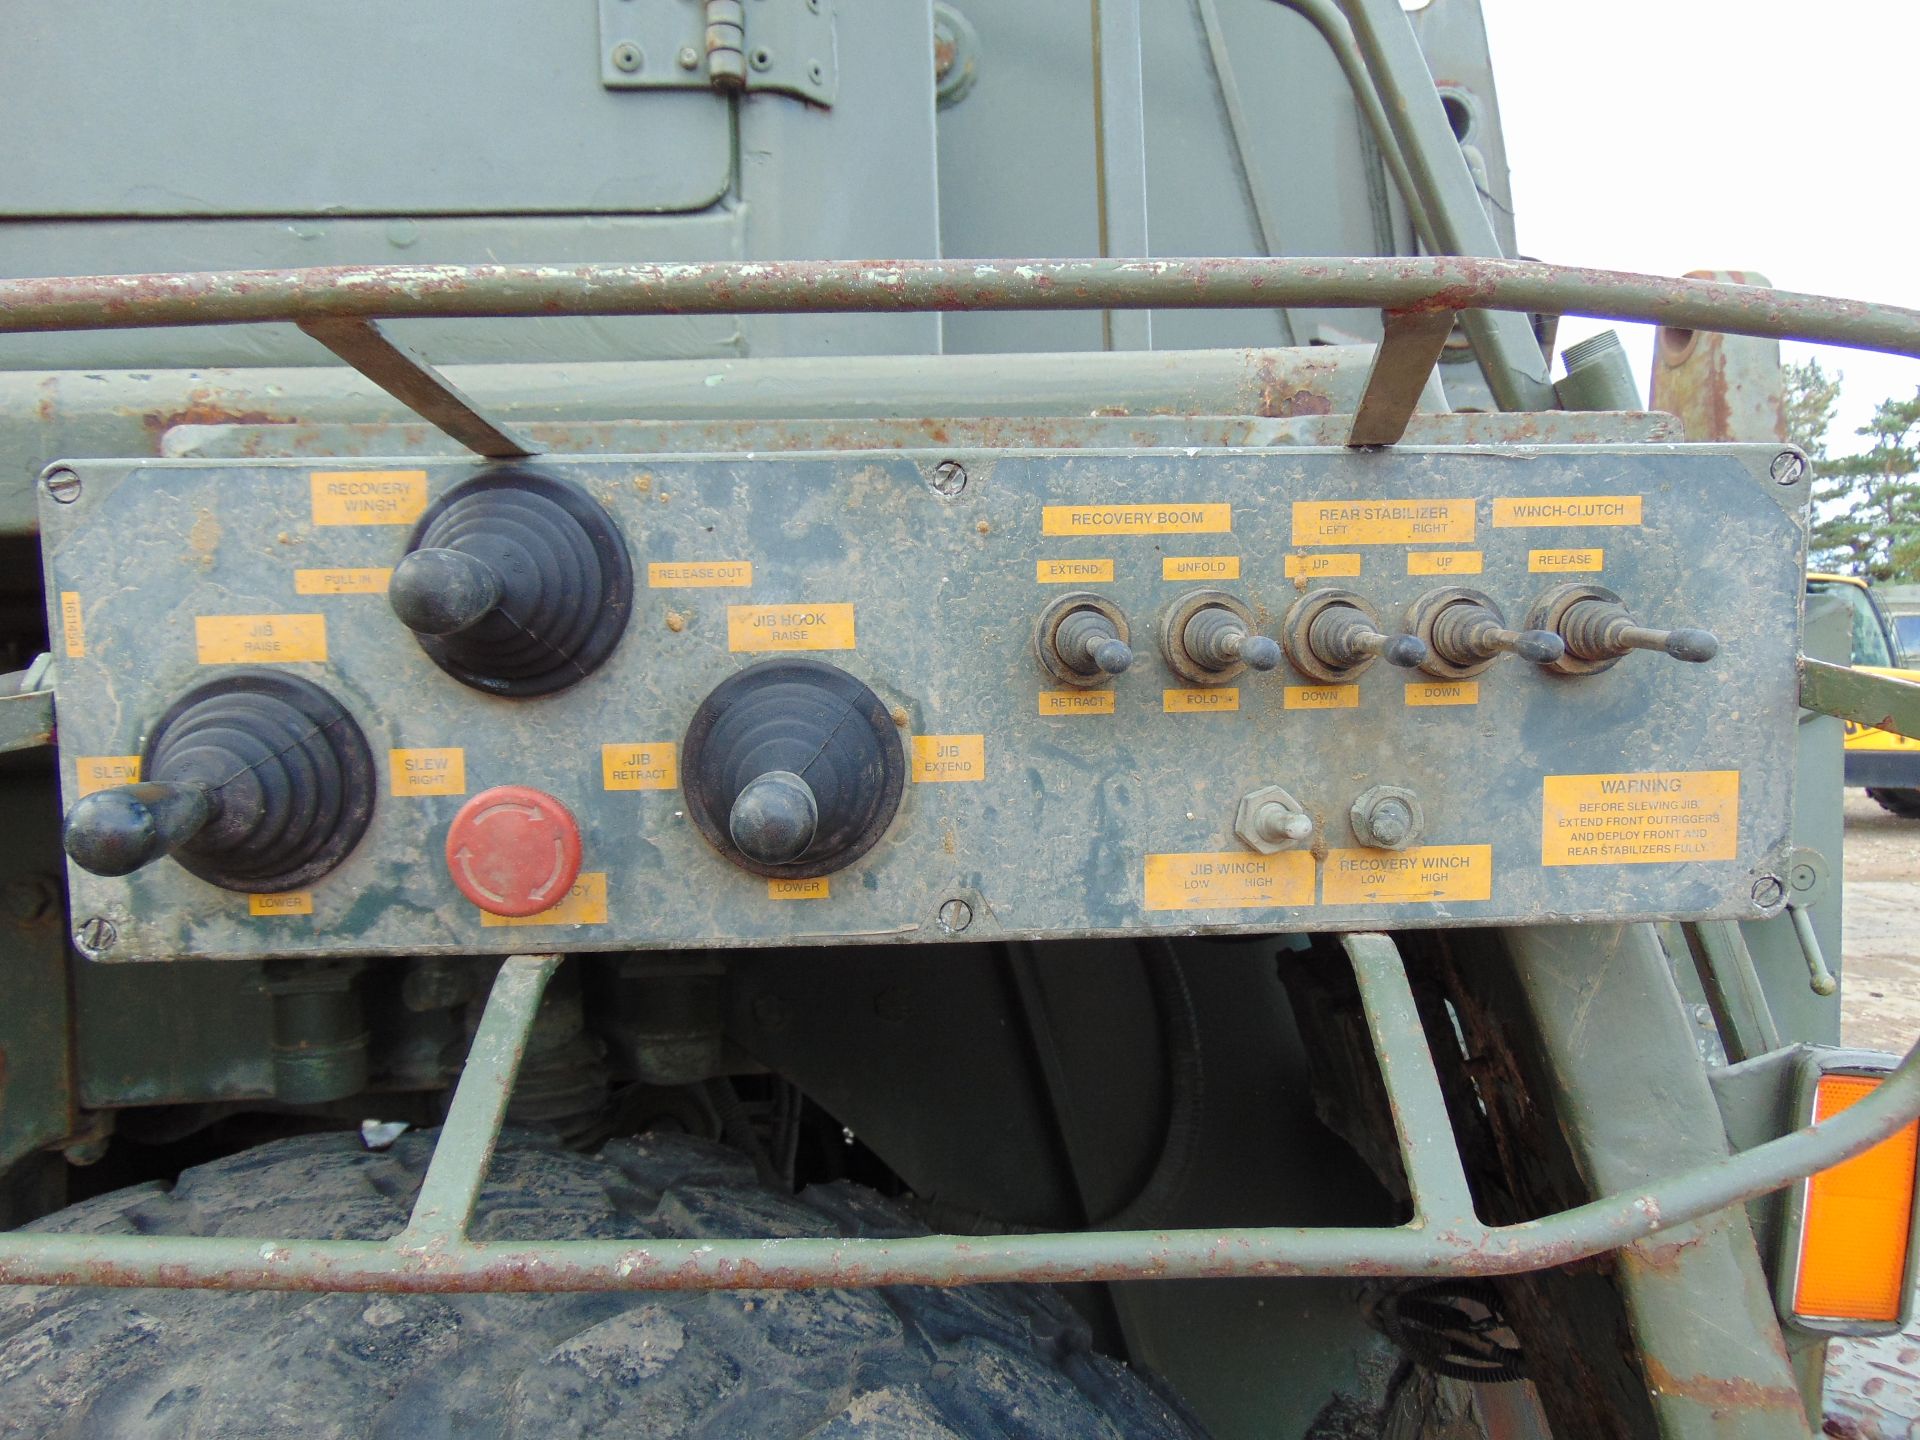 Foden 6x6 Recovery Vehicle which is Complete with Remotes and EKA Recovery Tools - Image 14 of 31